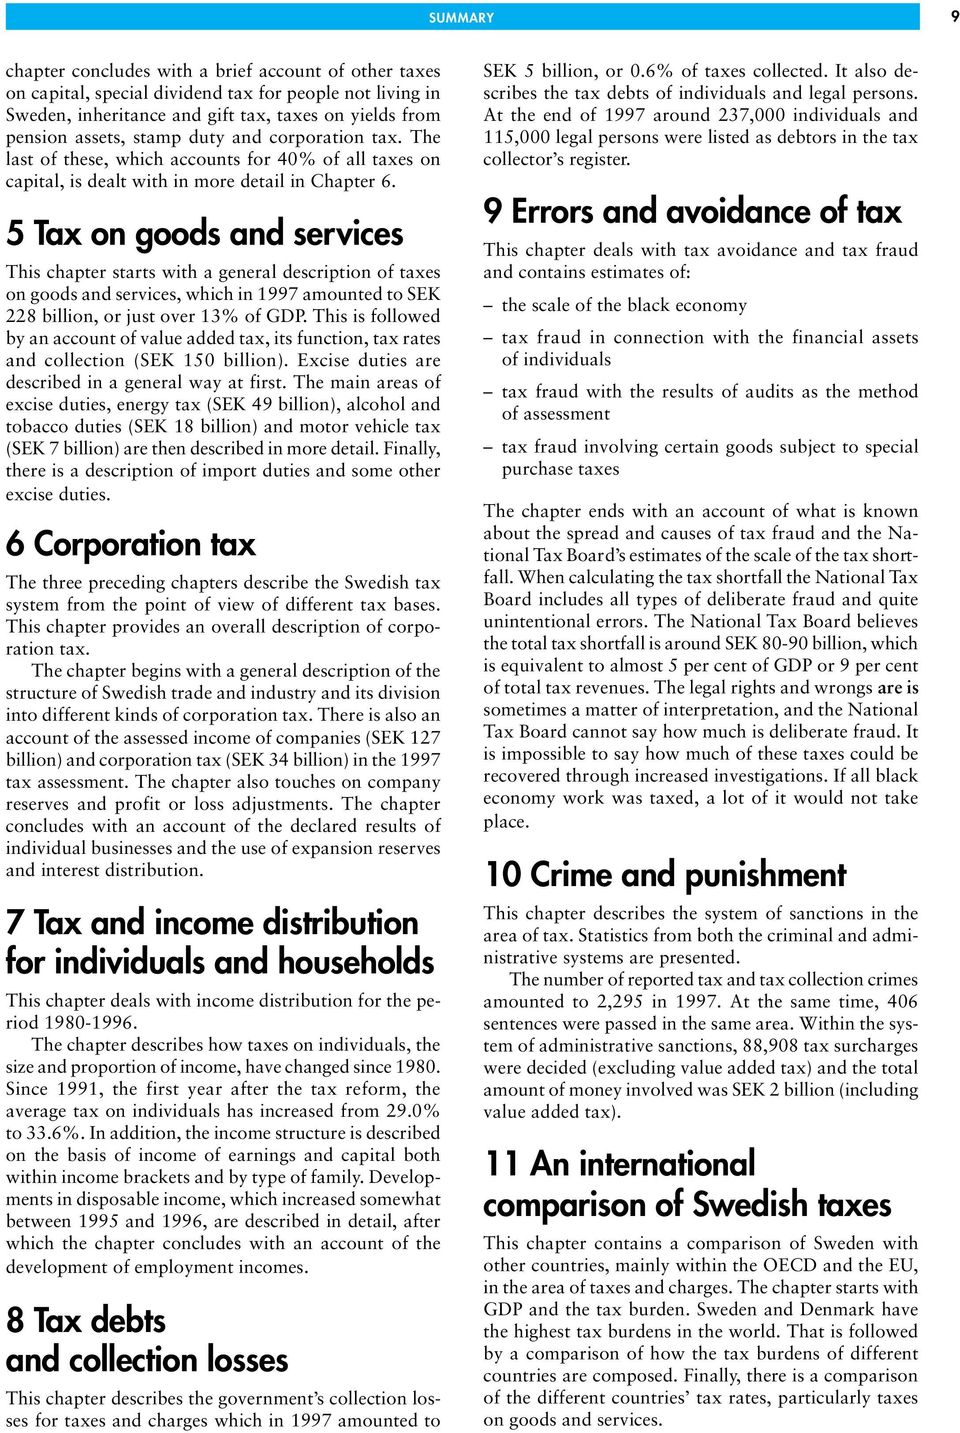 5 Tax on goods and services This chapter starts with a general description of taxes on goods and services, which in 1997 amounted to SEK 228 billion, or just over 13% of GDP.